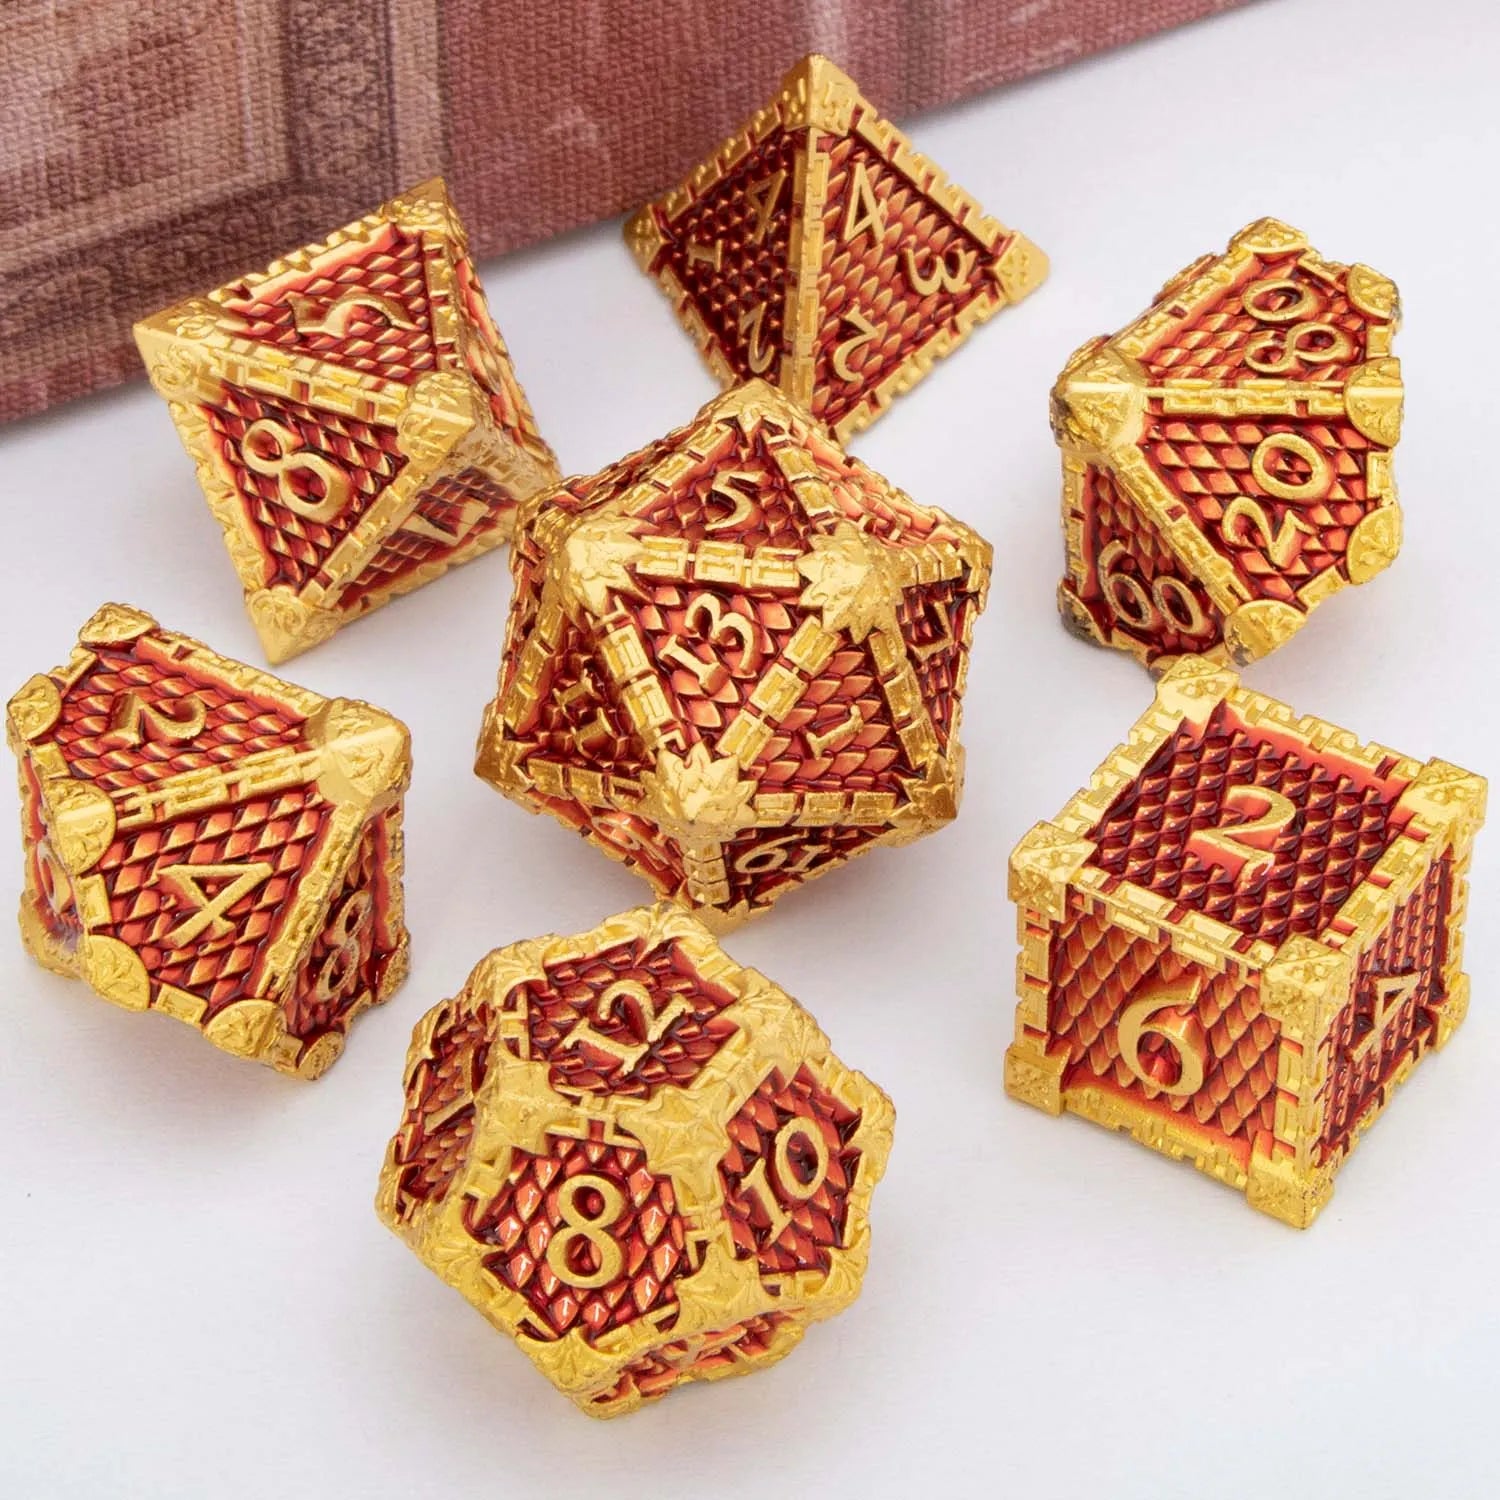 DND Metal Dice Set Dragon Scale D&D Dice Dungeon and Dragon Role Playing Games Black Green Polyhedral Dice RPG D and D Dice Golden Red